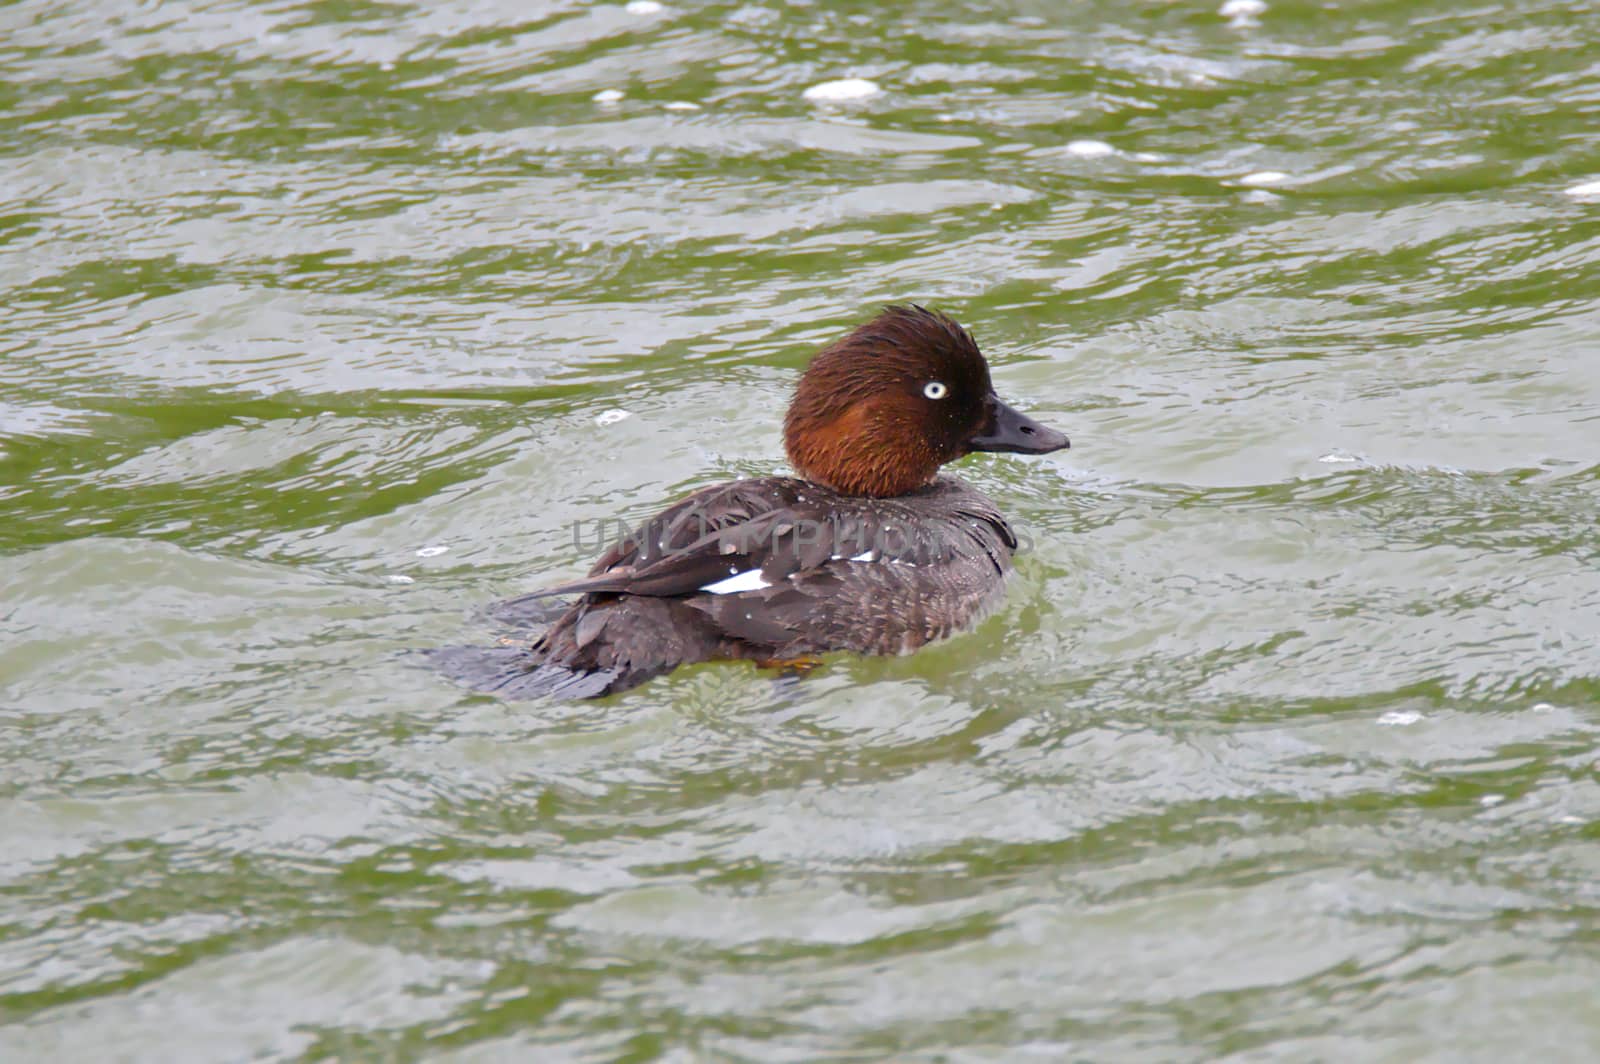 Brown common goldeneye swimming in the sea. Some water drops on the feather, beak and one white eye visible.